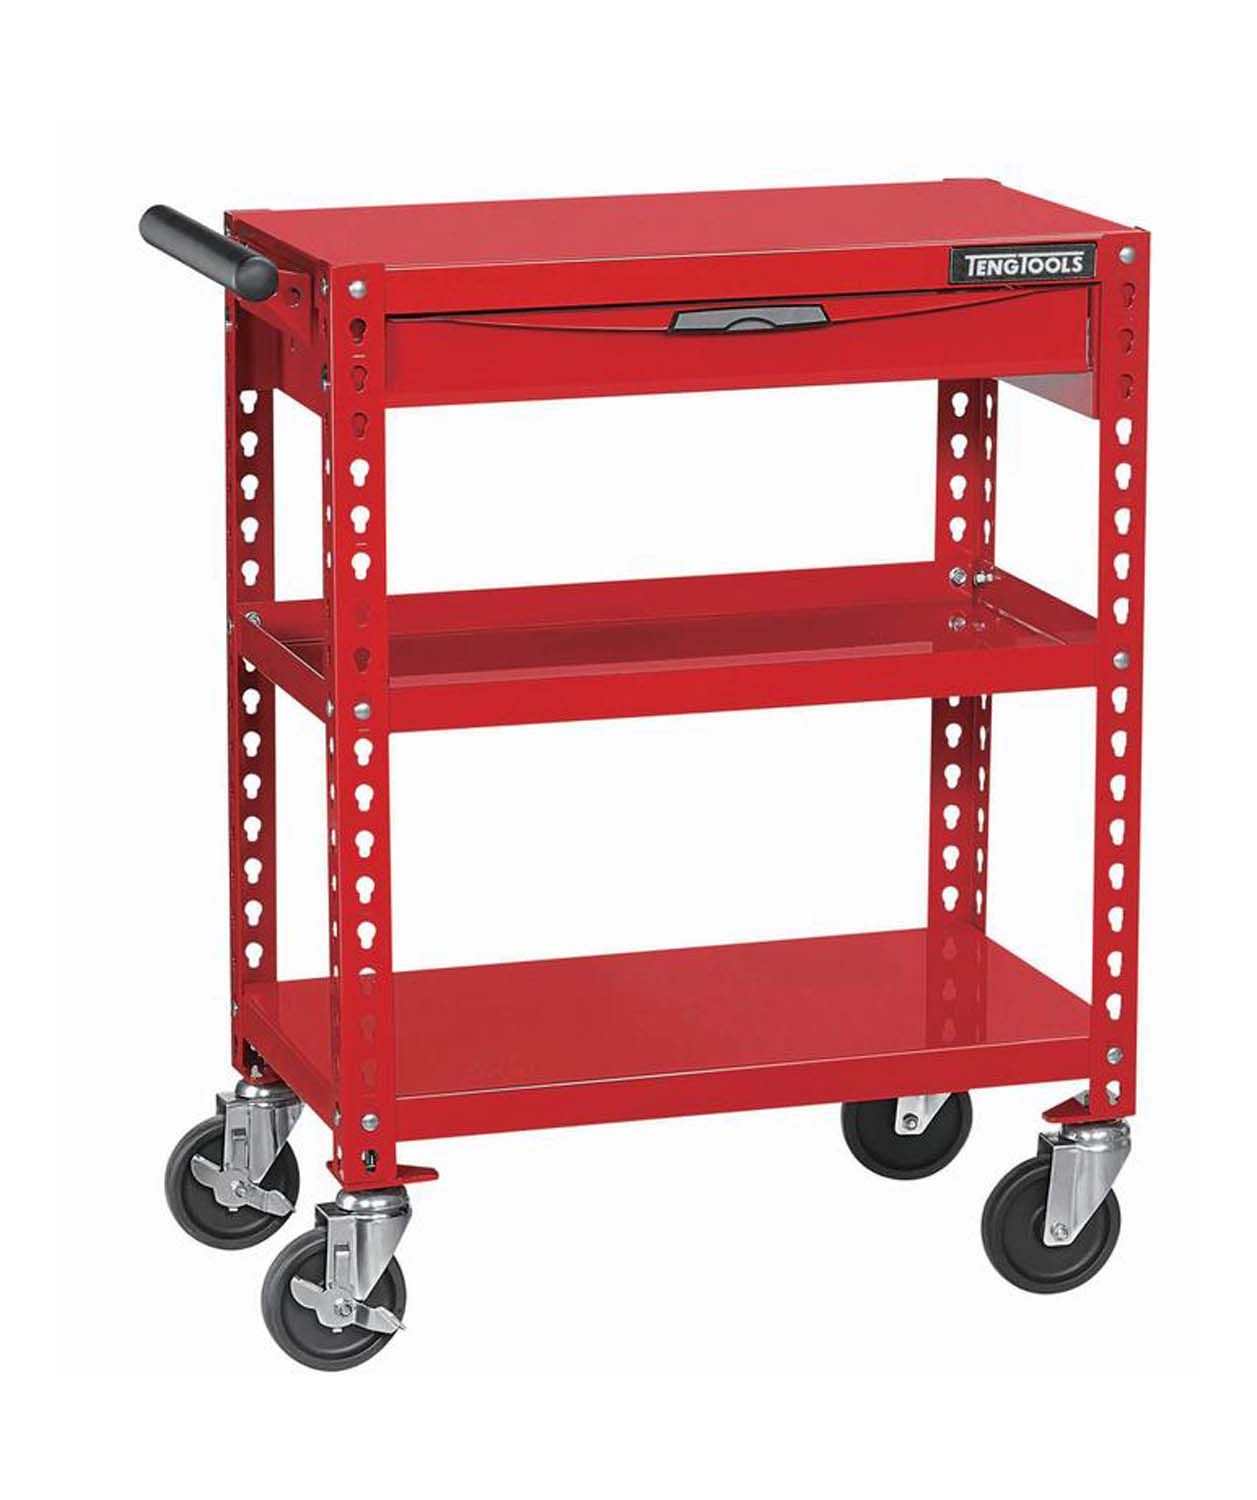 Teng Tools TR070 Mobile Work Trolley